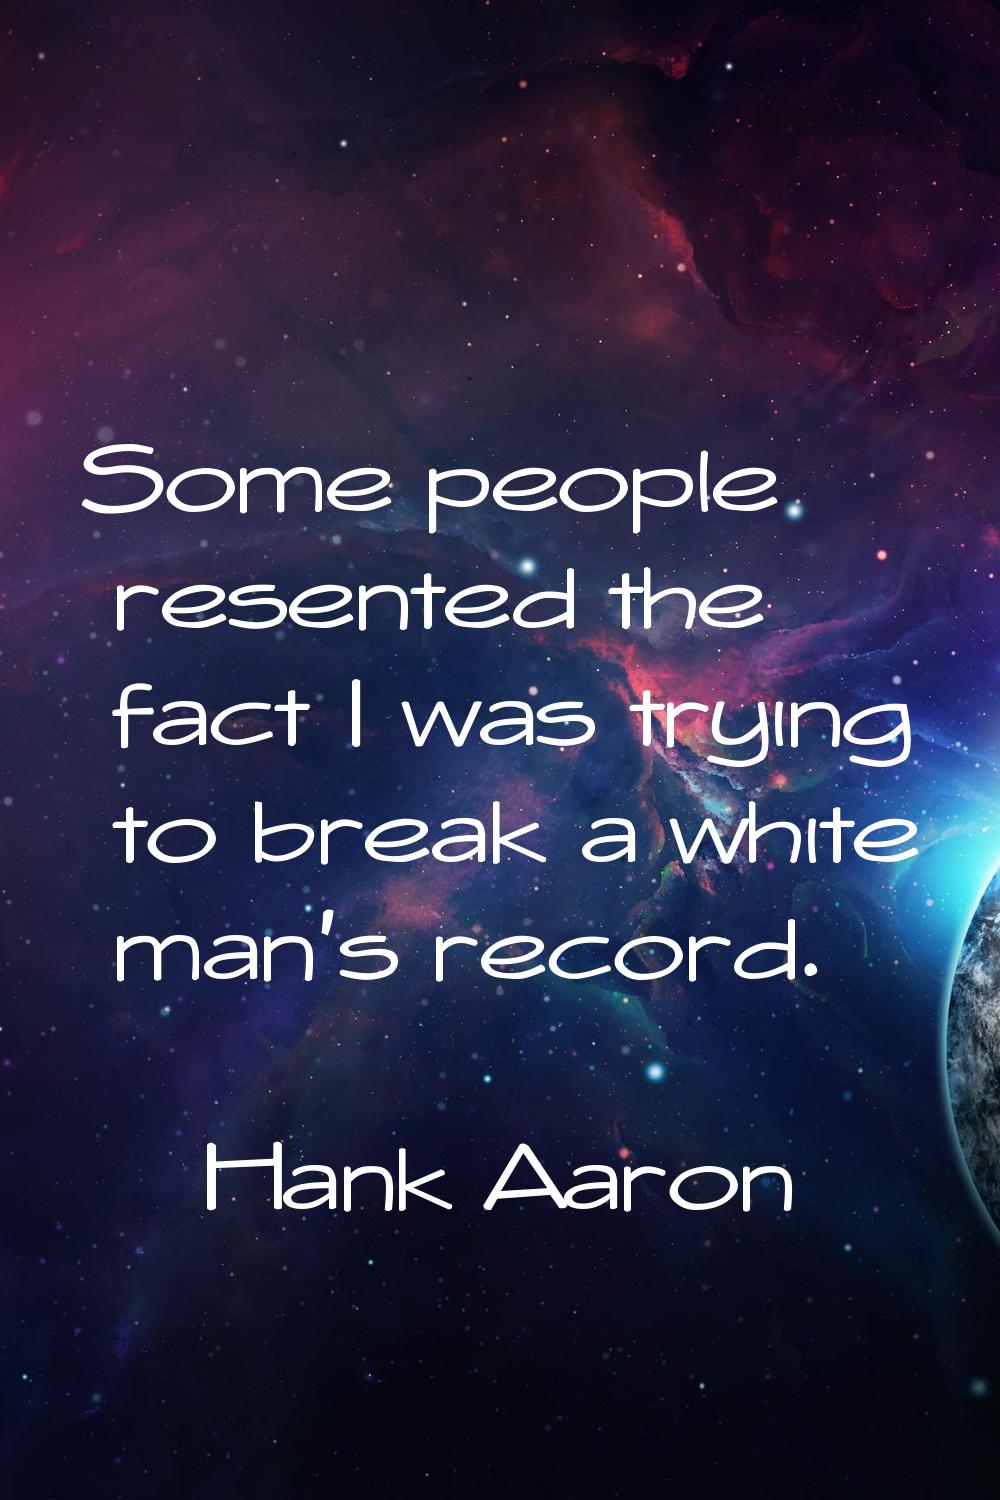 Some people resented the fact I was trying to break a white man's record.